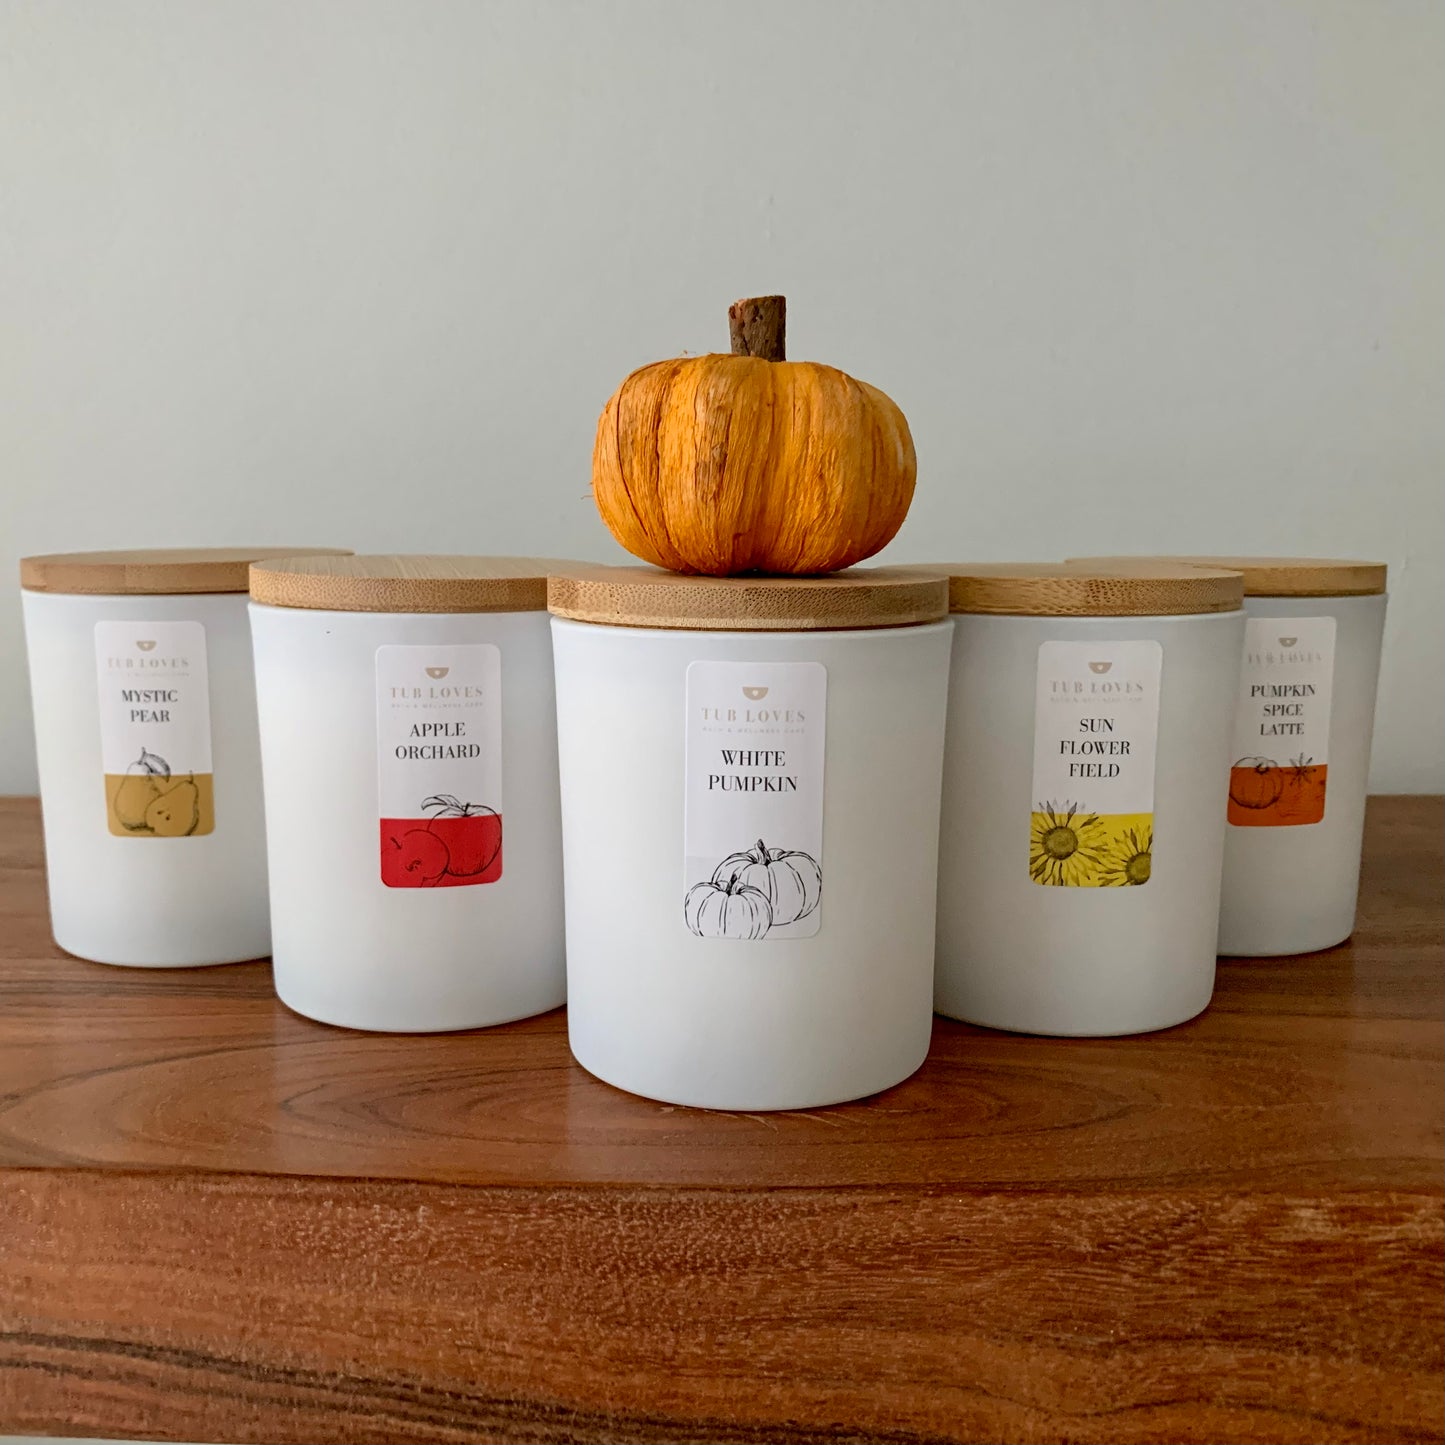 Pumpkin Spice Latte - Natural Soy Candle